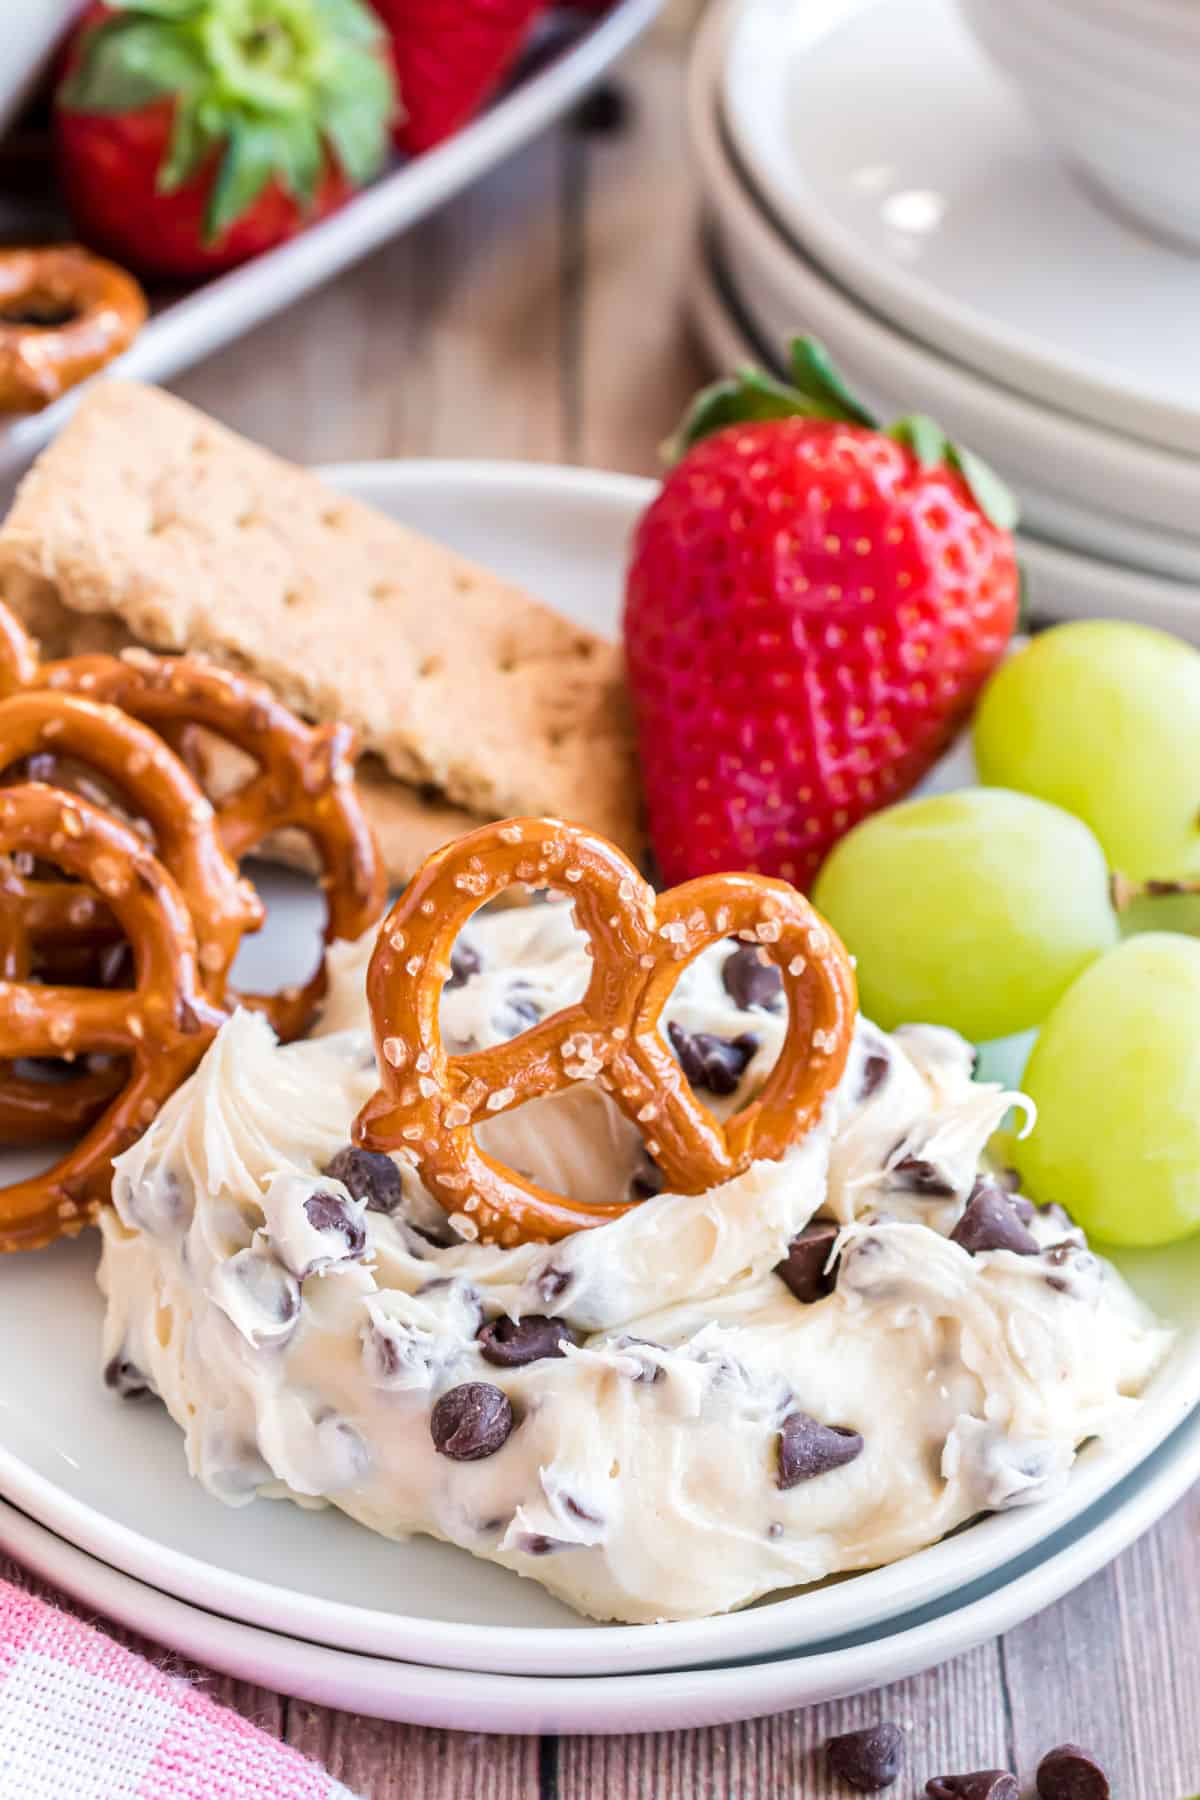 Cookie dough dip on a plate served with pretzels and strawberries.